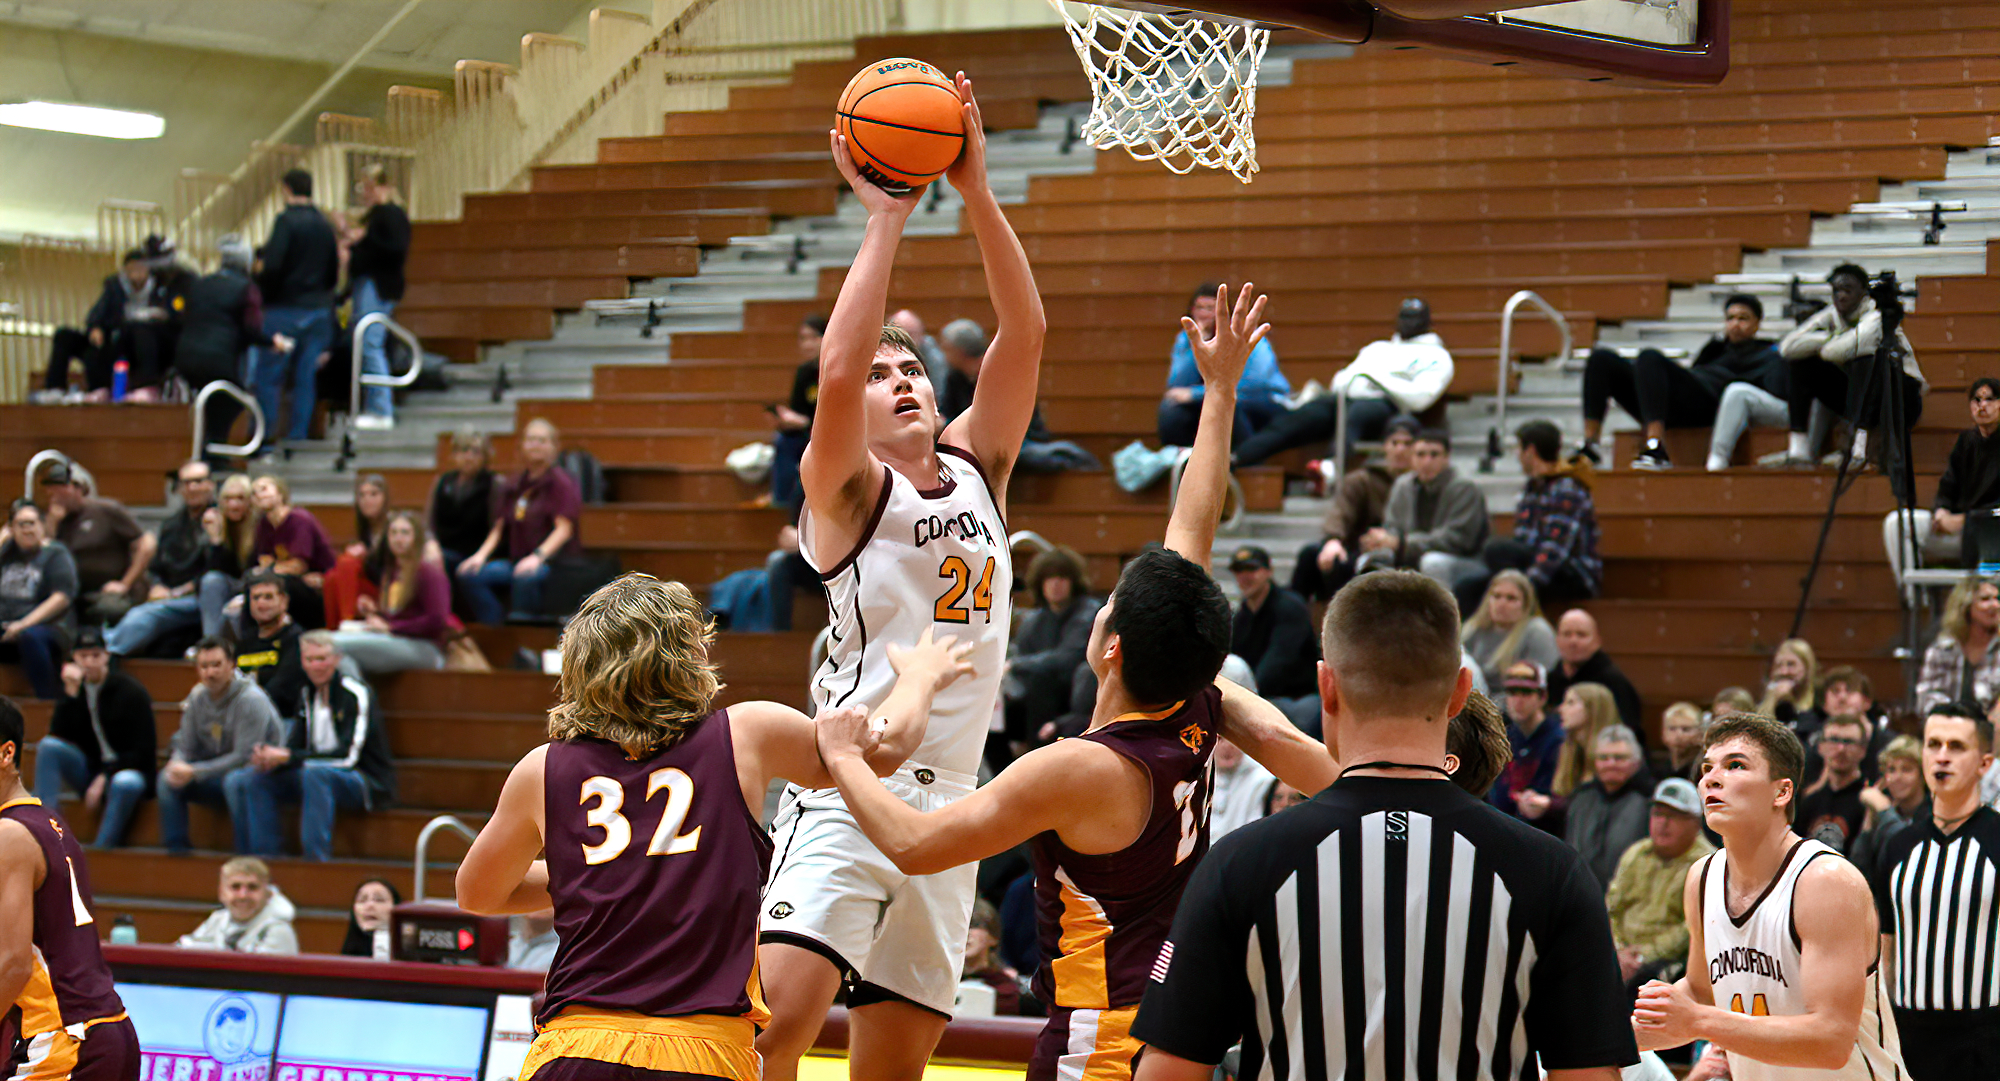 Sophomore Jackson Loge led Concordia with 15 points and six boards in the Cobbers 1-point win over Wis.-River Falls.